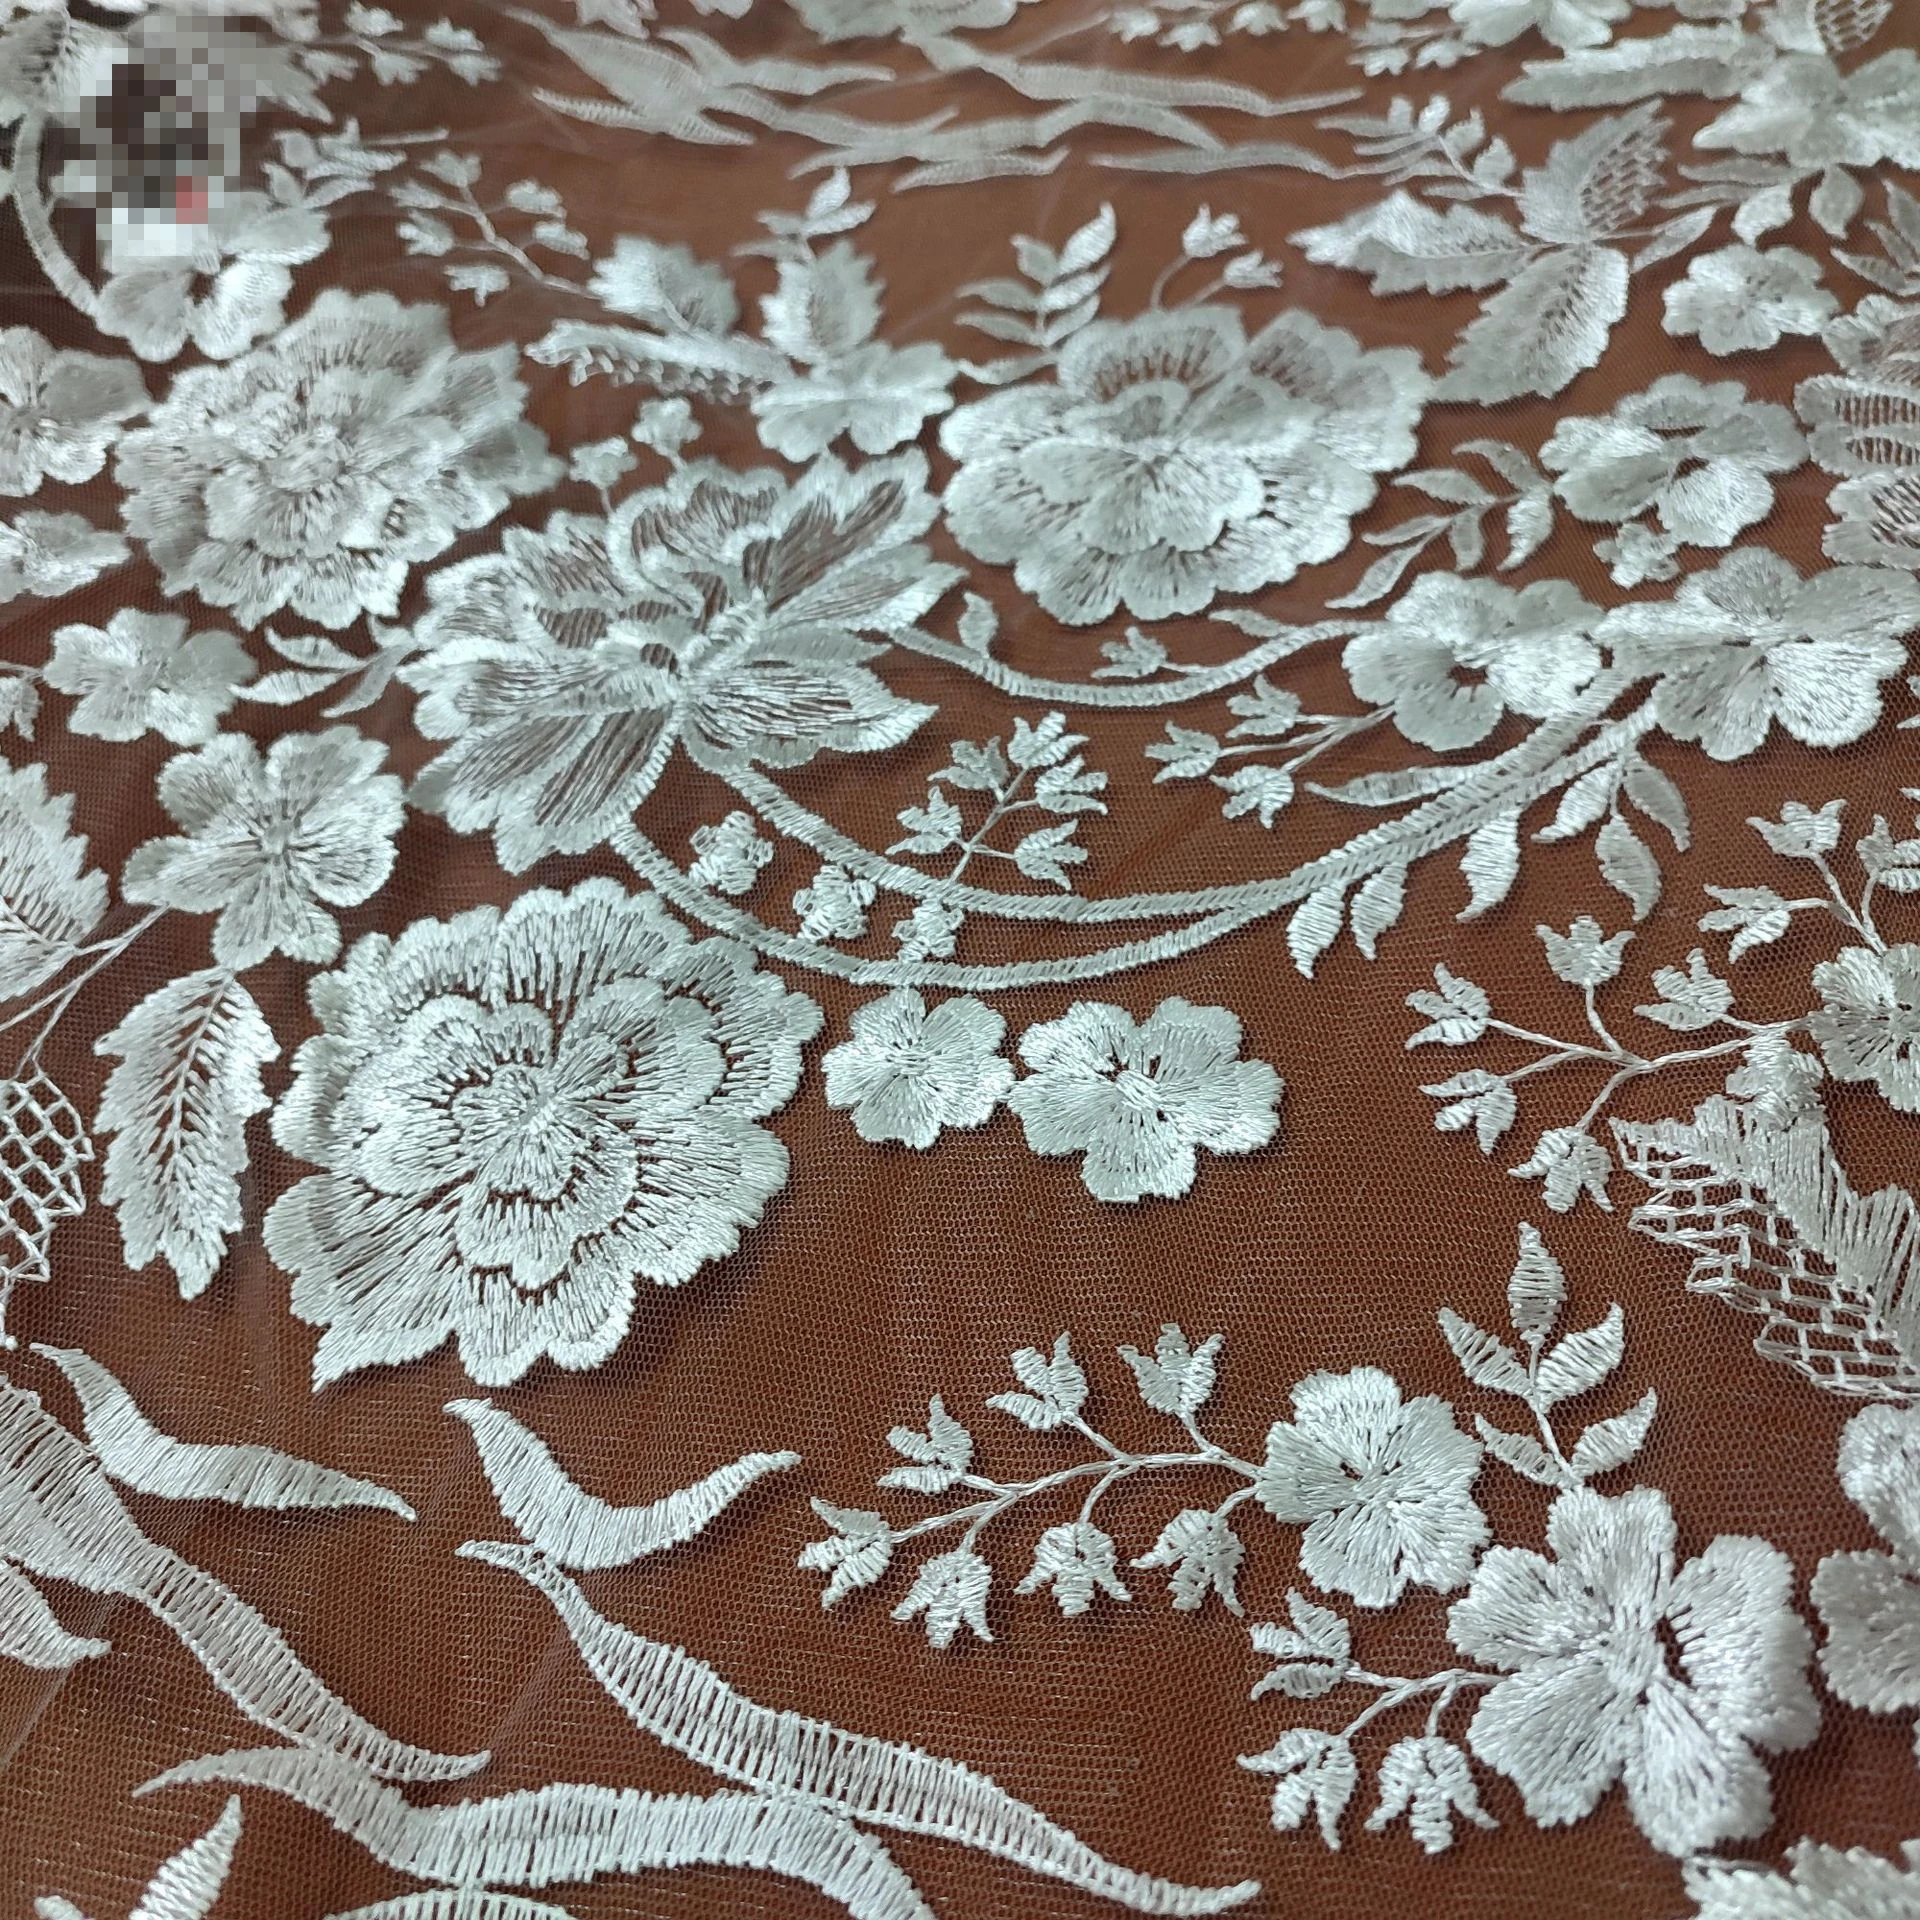 130CM Wide Embroidery Tulle Mesh Lace Alibaba com Apparel Fabrics Textiles Fabric and Lace Allover Flowers Elegant Home DIY Sew